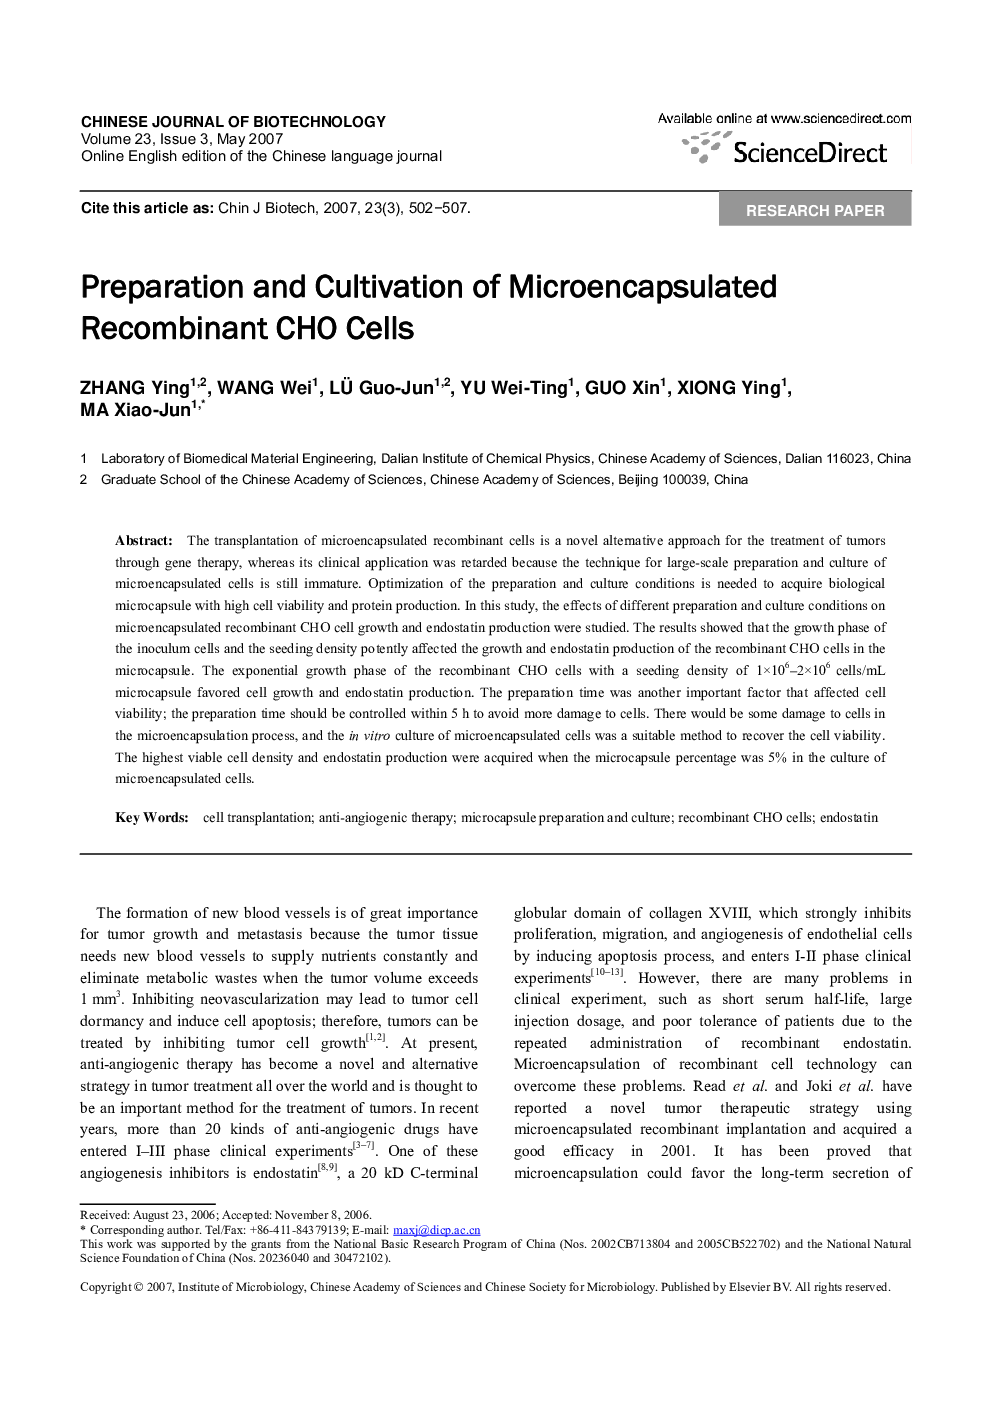 Preparation and Cultivation of icroencapsulated Recombinant CHO Cells